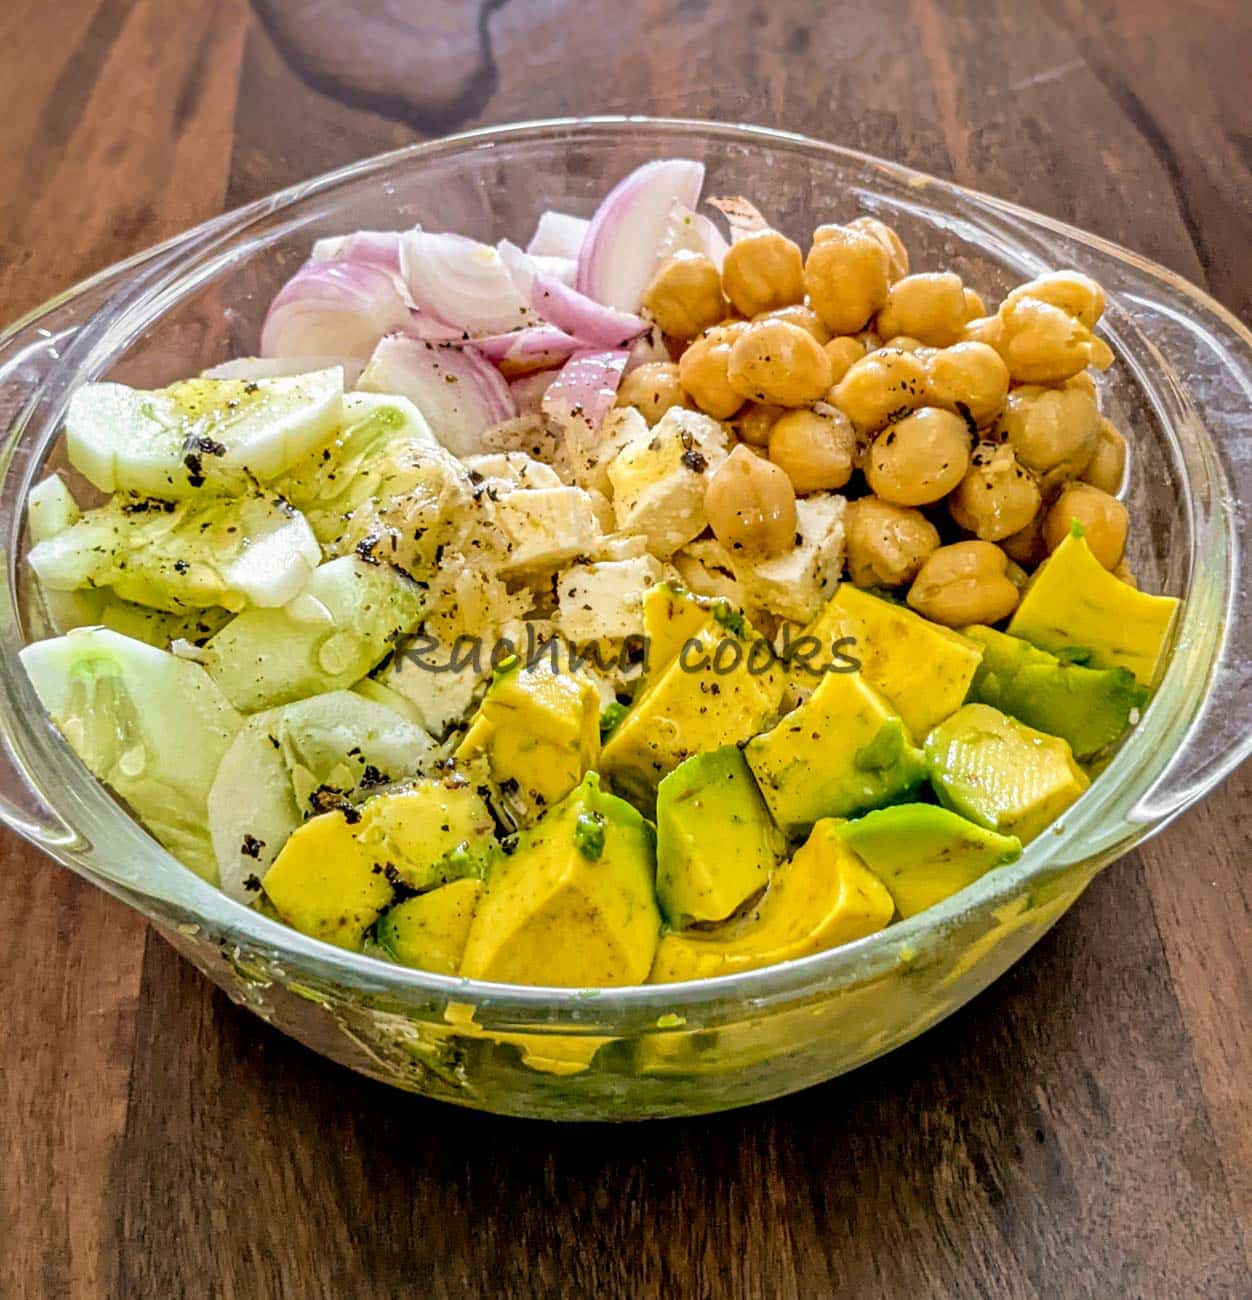 Dressing drizzled over chopped avocado, onion, cucumber, chickpeas and feta